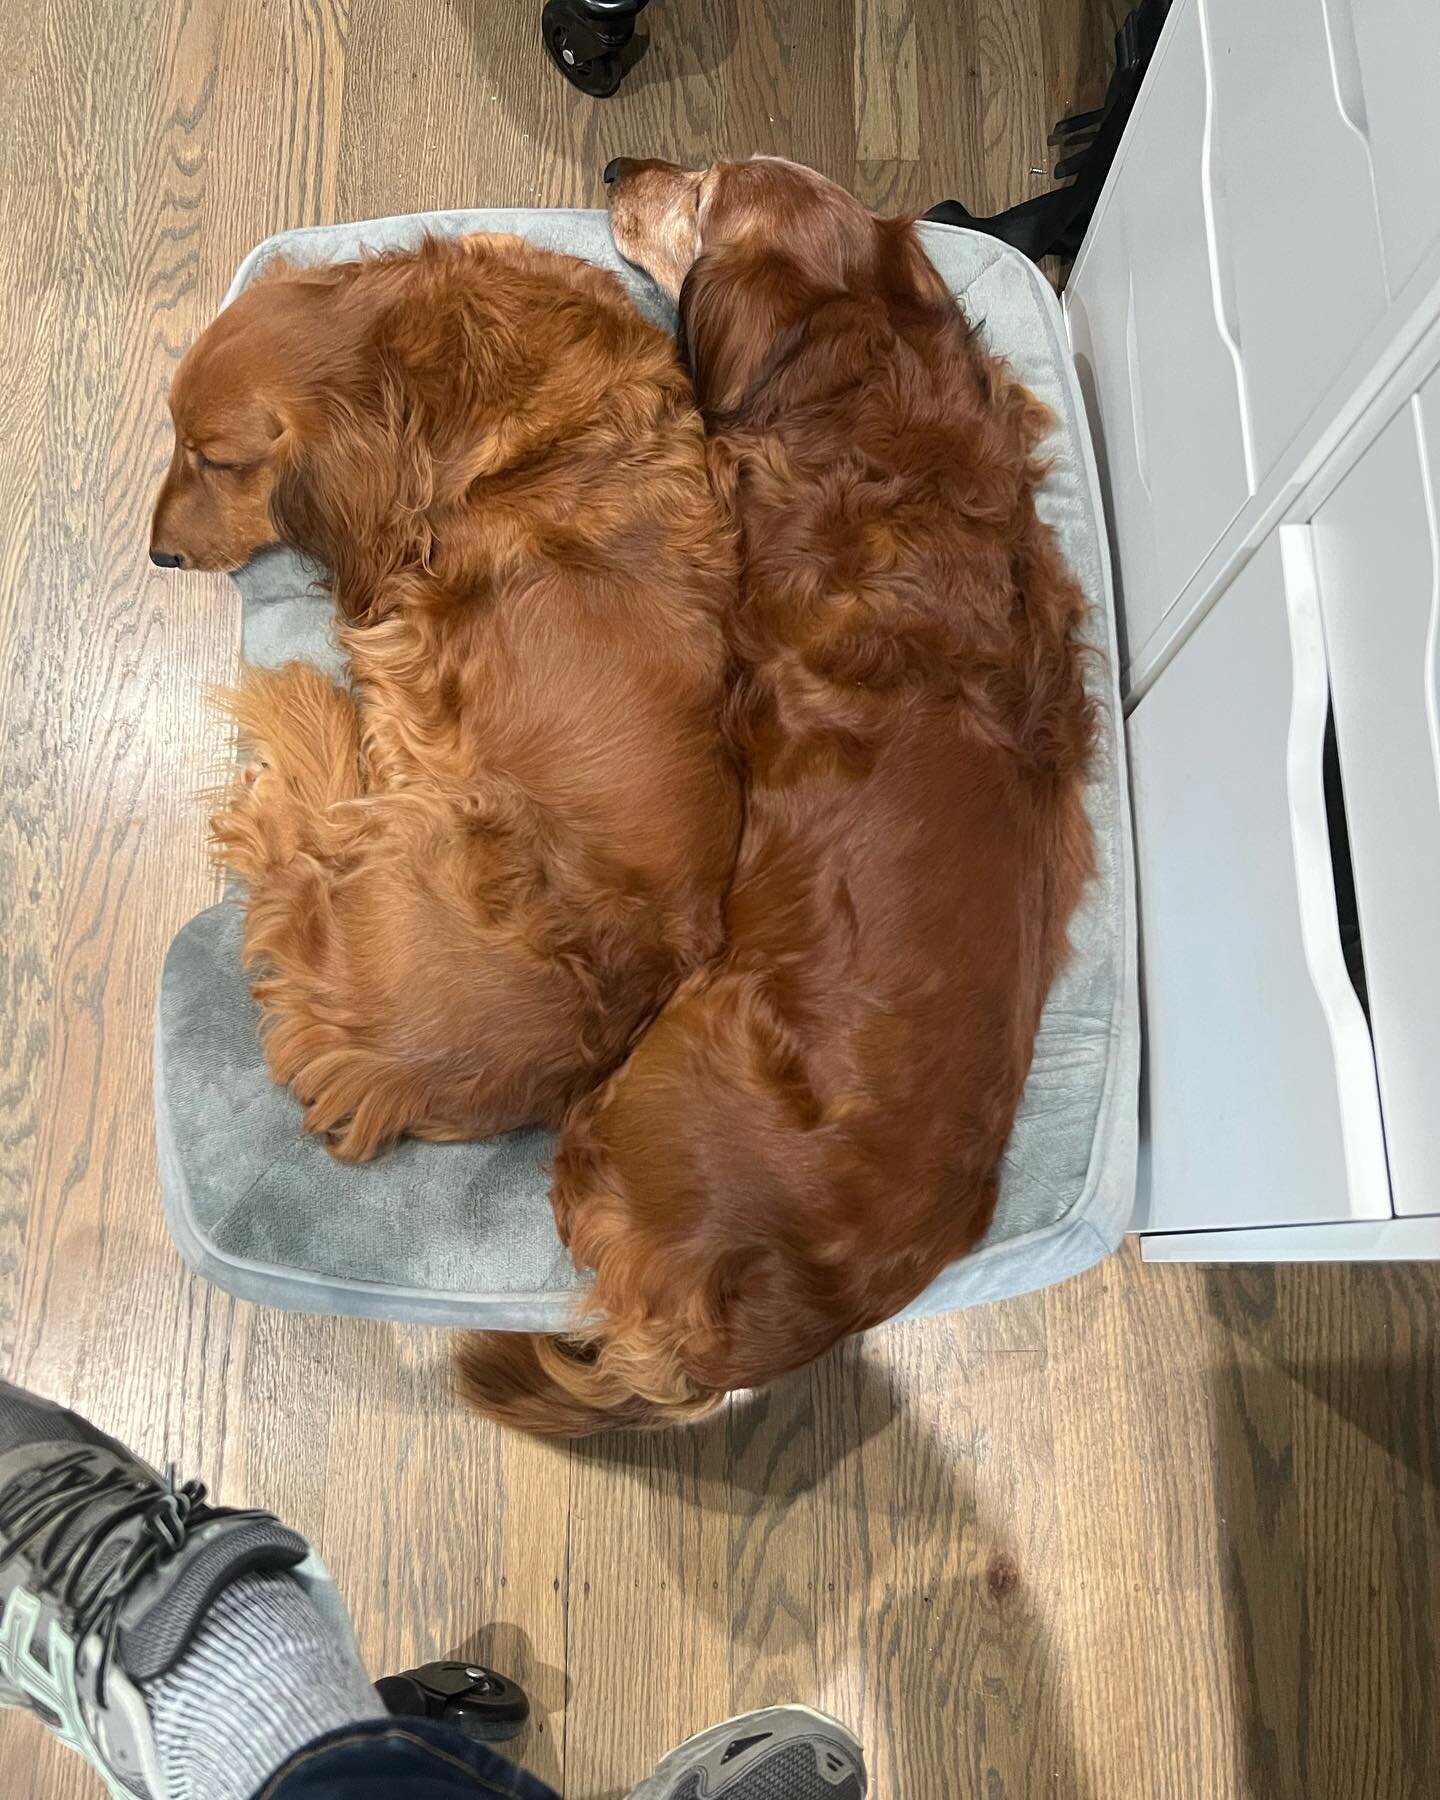 They would prefer a bigger bed but space is limited.